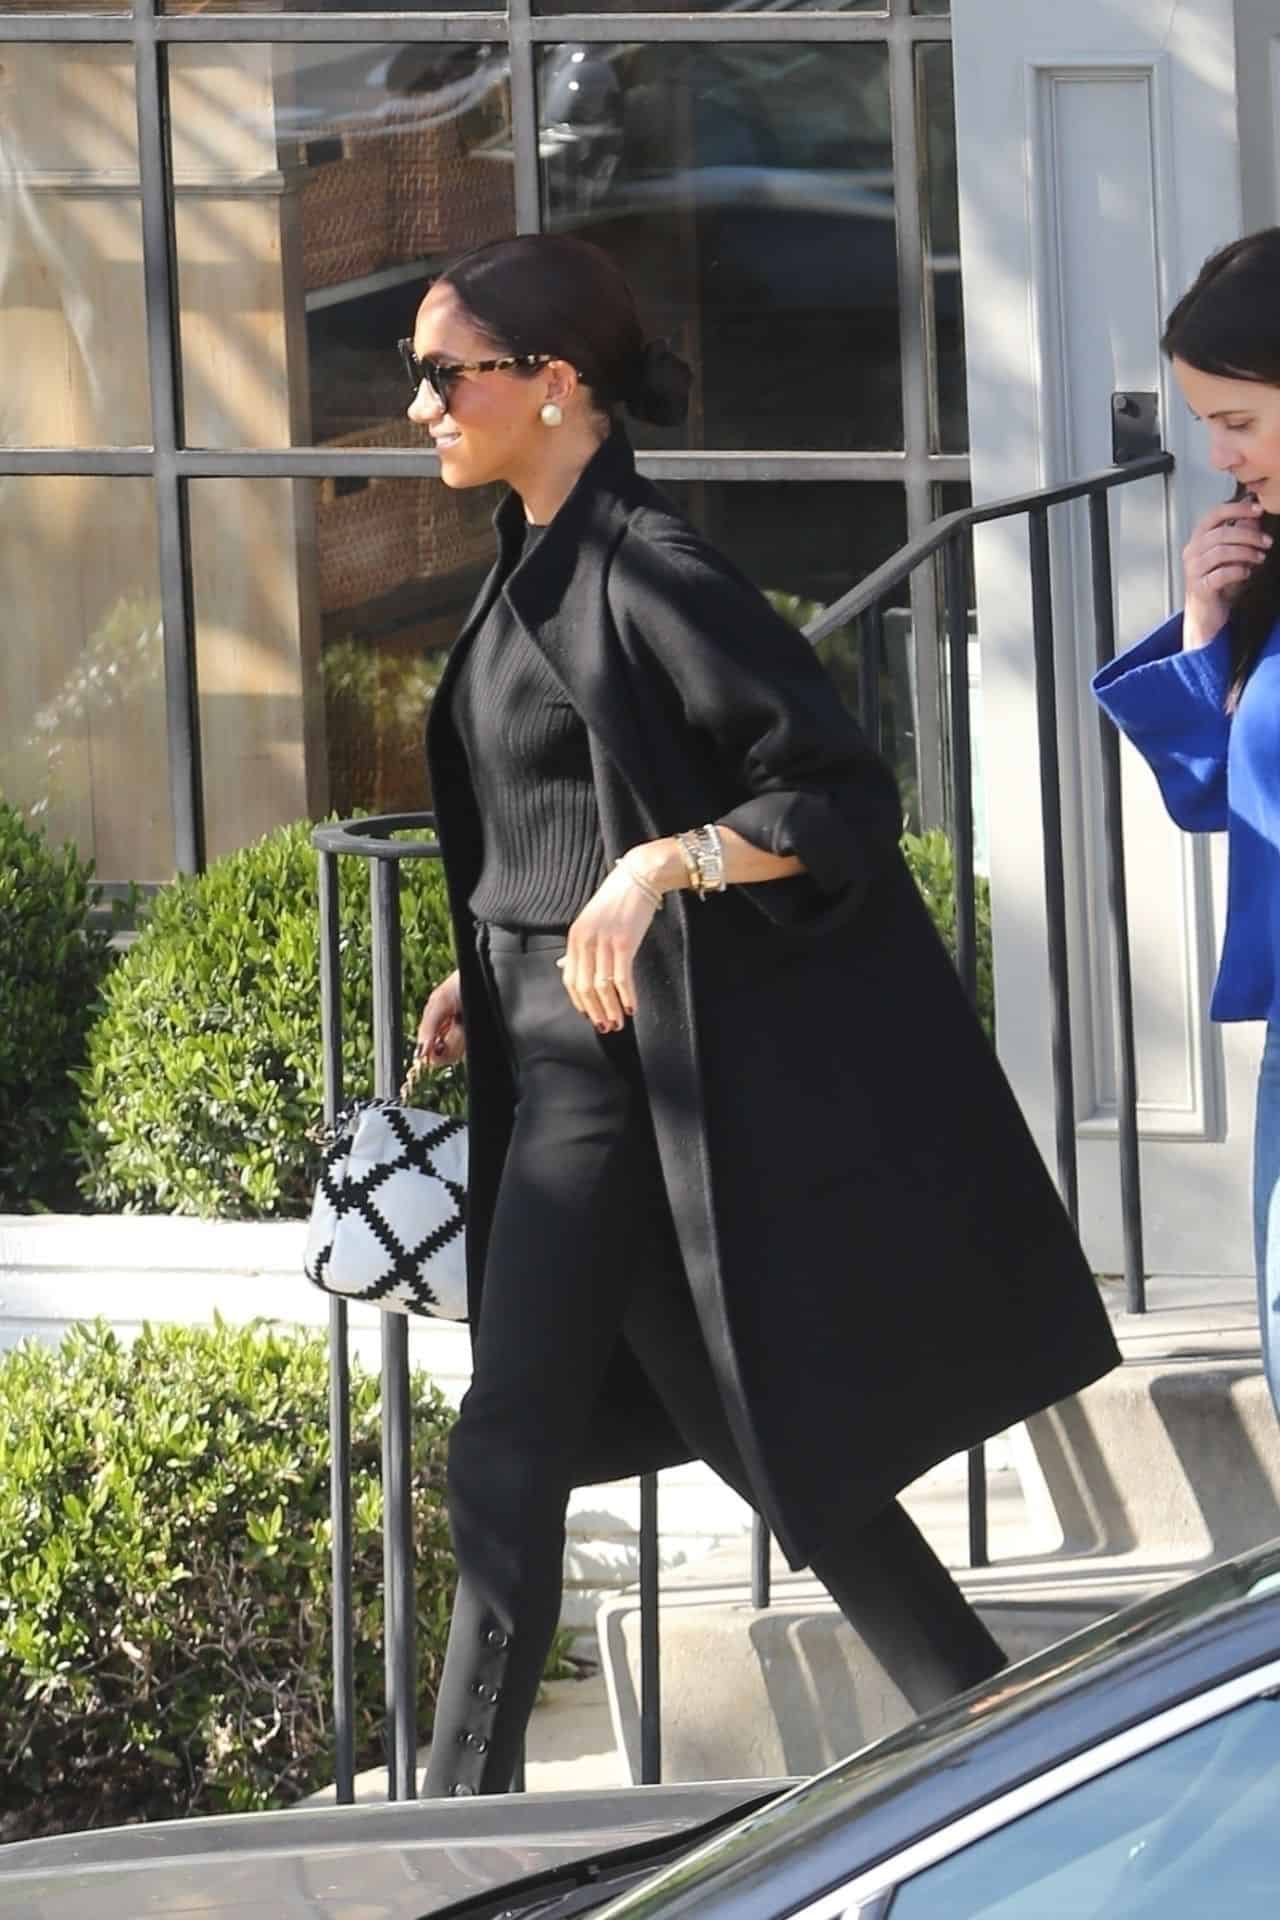 Meghan Markle Shows Off Her Street Style in a Sleek All-Black Outfit